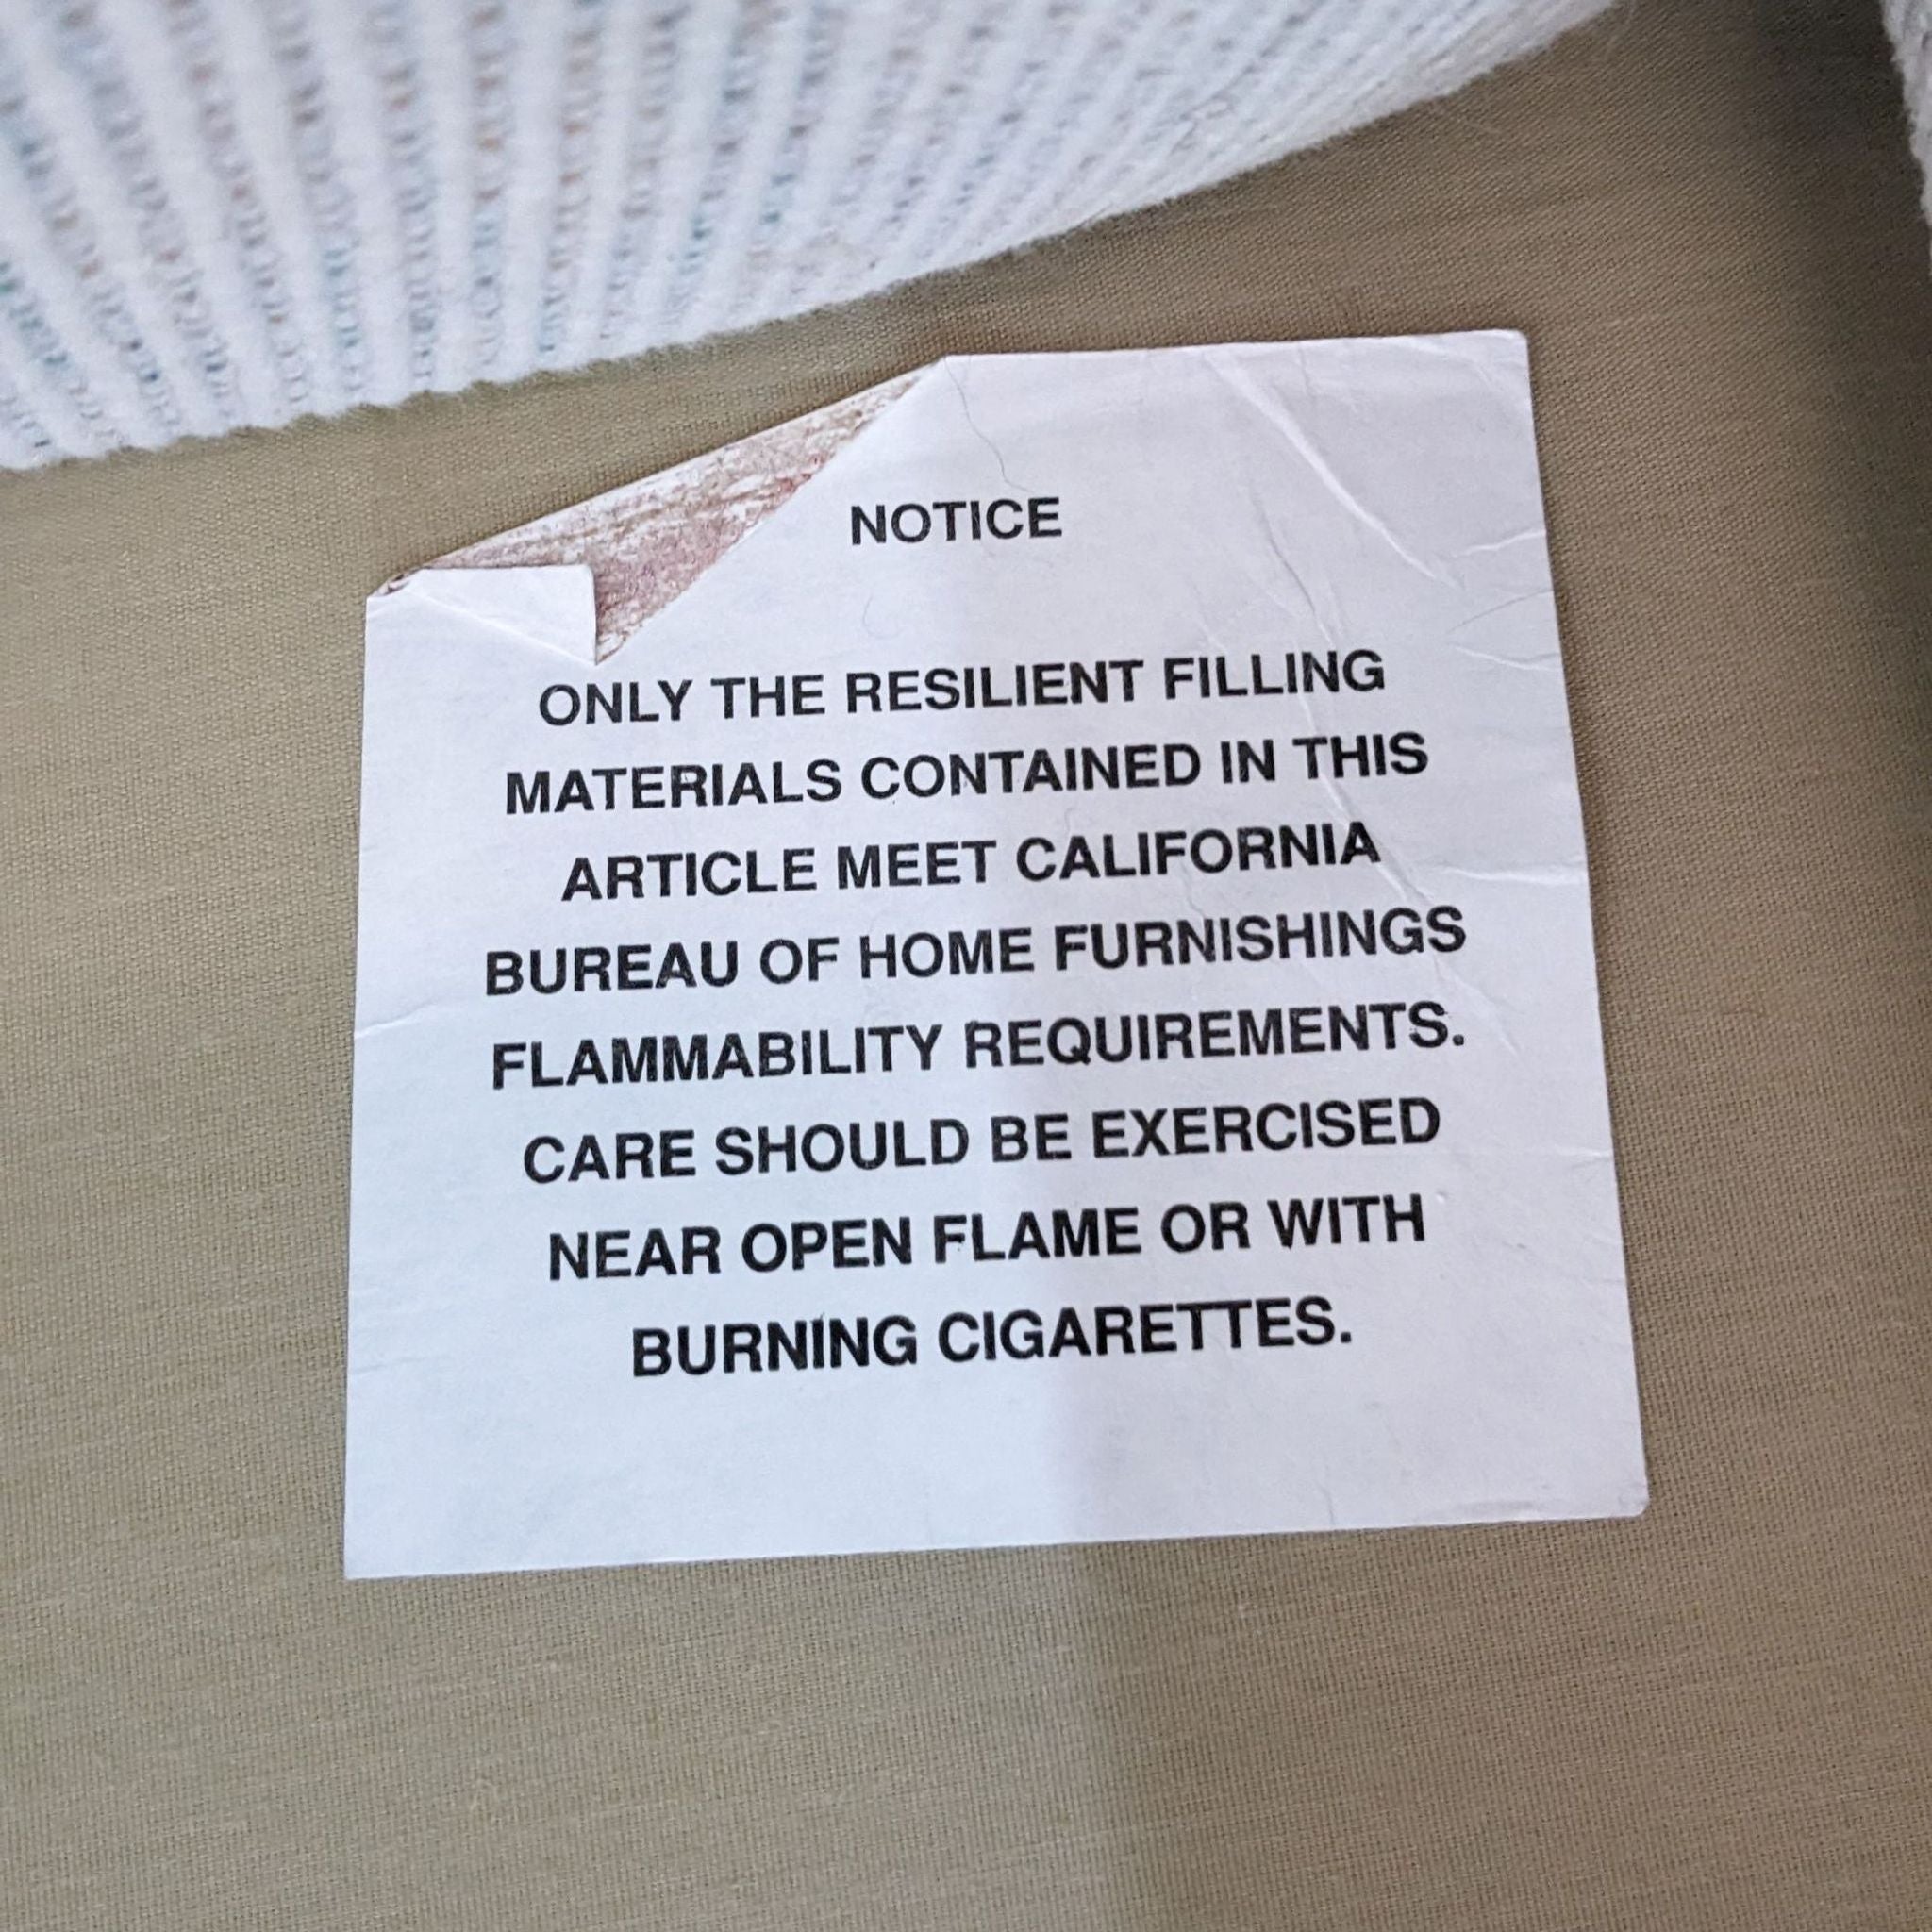 3. A visible warning label on a sofa cushion detailing flammability guidelines and the use of resilient filling materials.